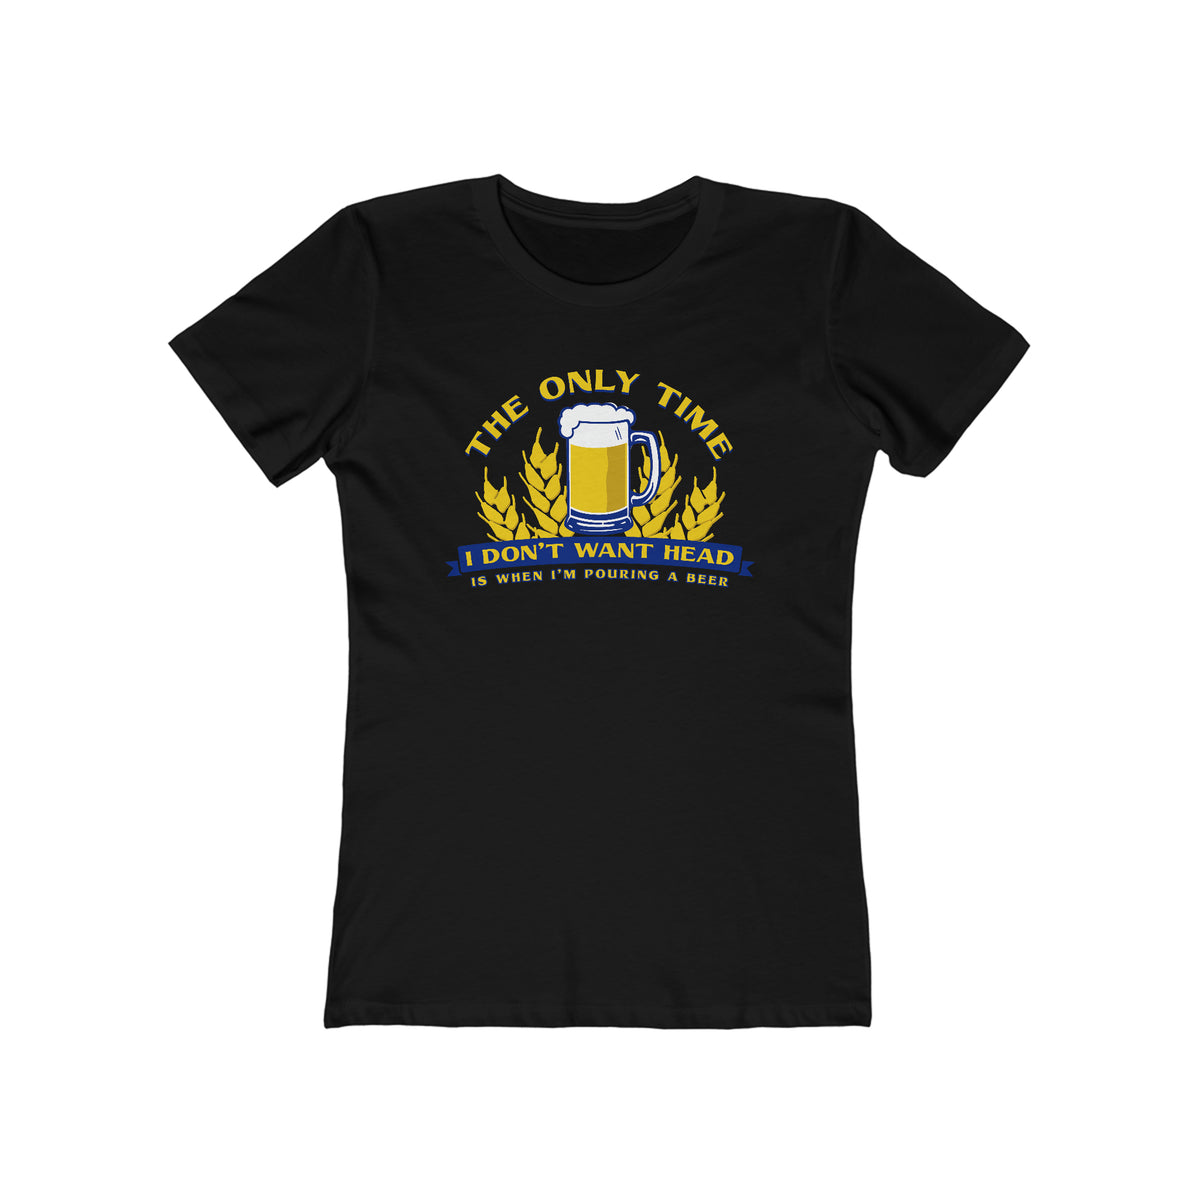 The Only Time I Don't Want Head Is When I'm Pouring A Beer - Women’s T-Shirt